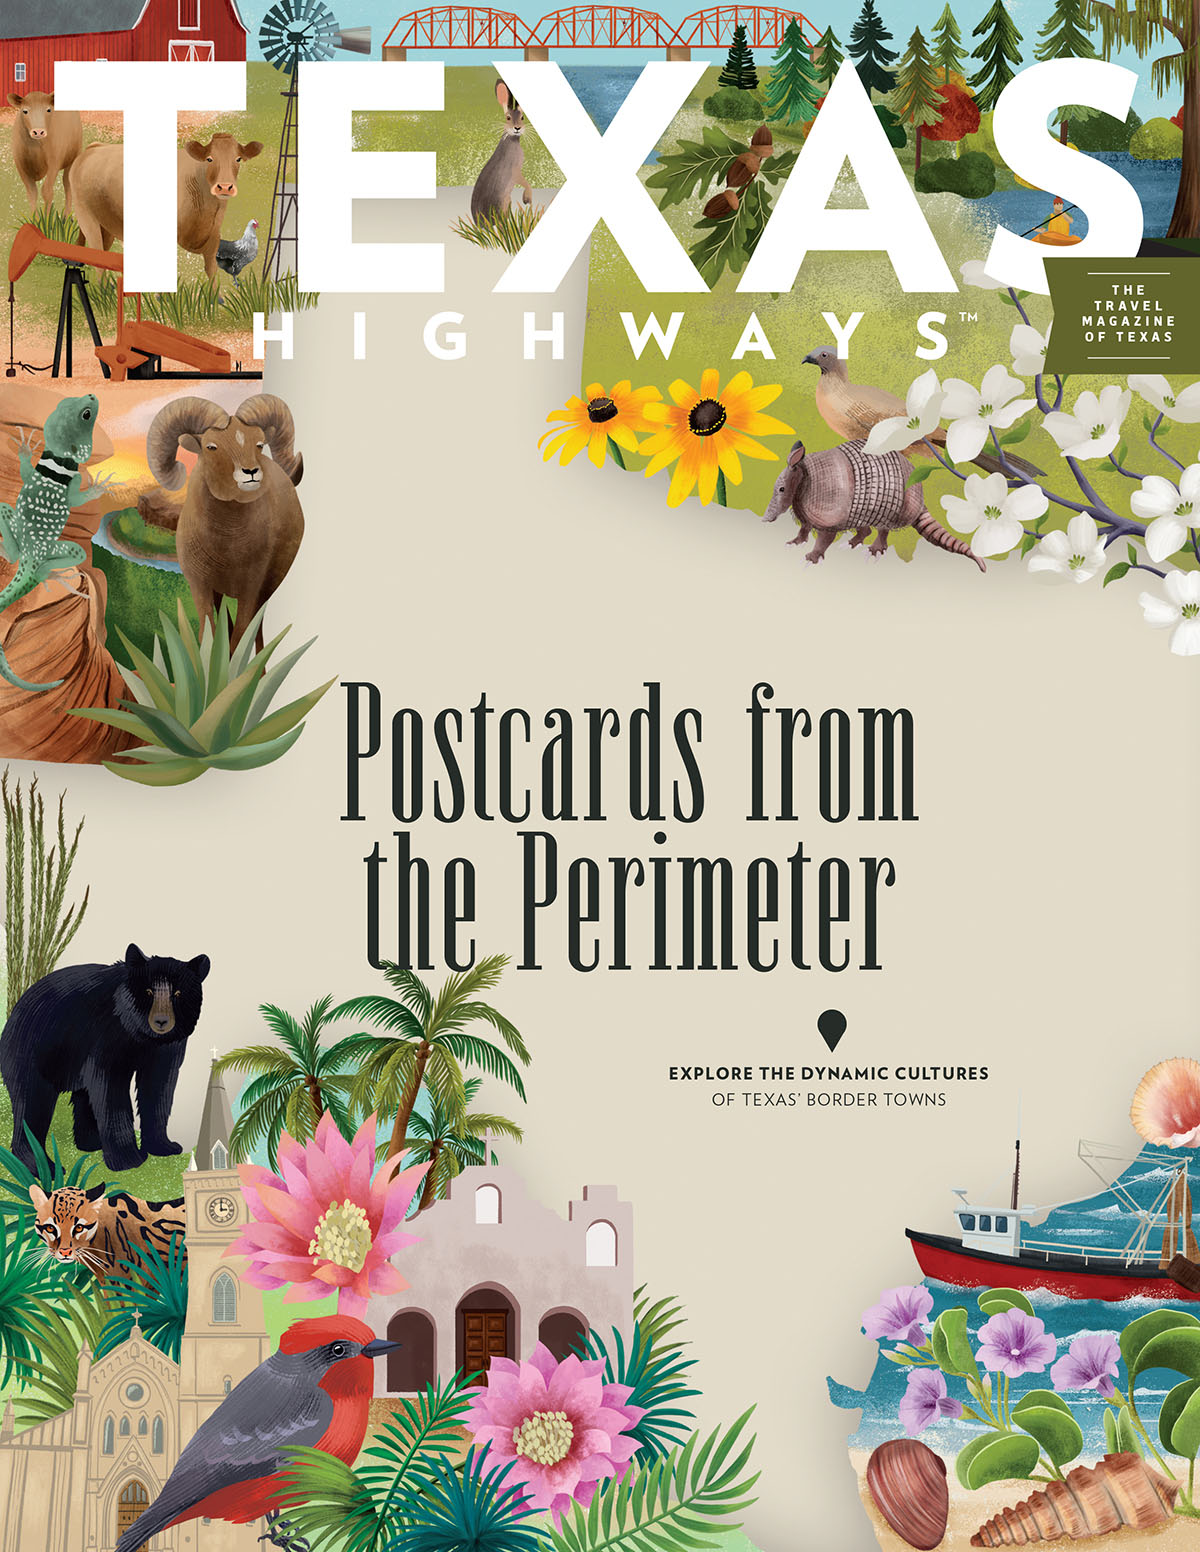 The June 2022 cover of Texas Highways Magazine, featuring an illustration of Texas objects and the text "Postcards from the Perimeter"